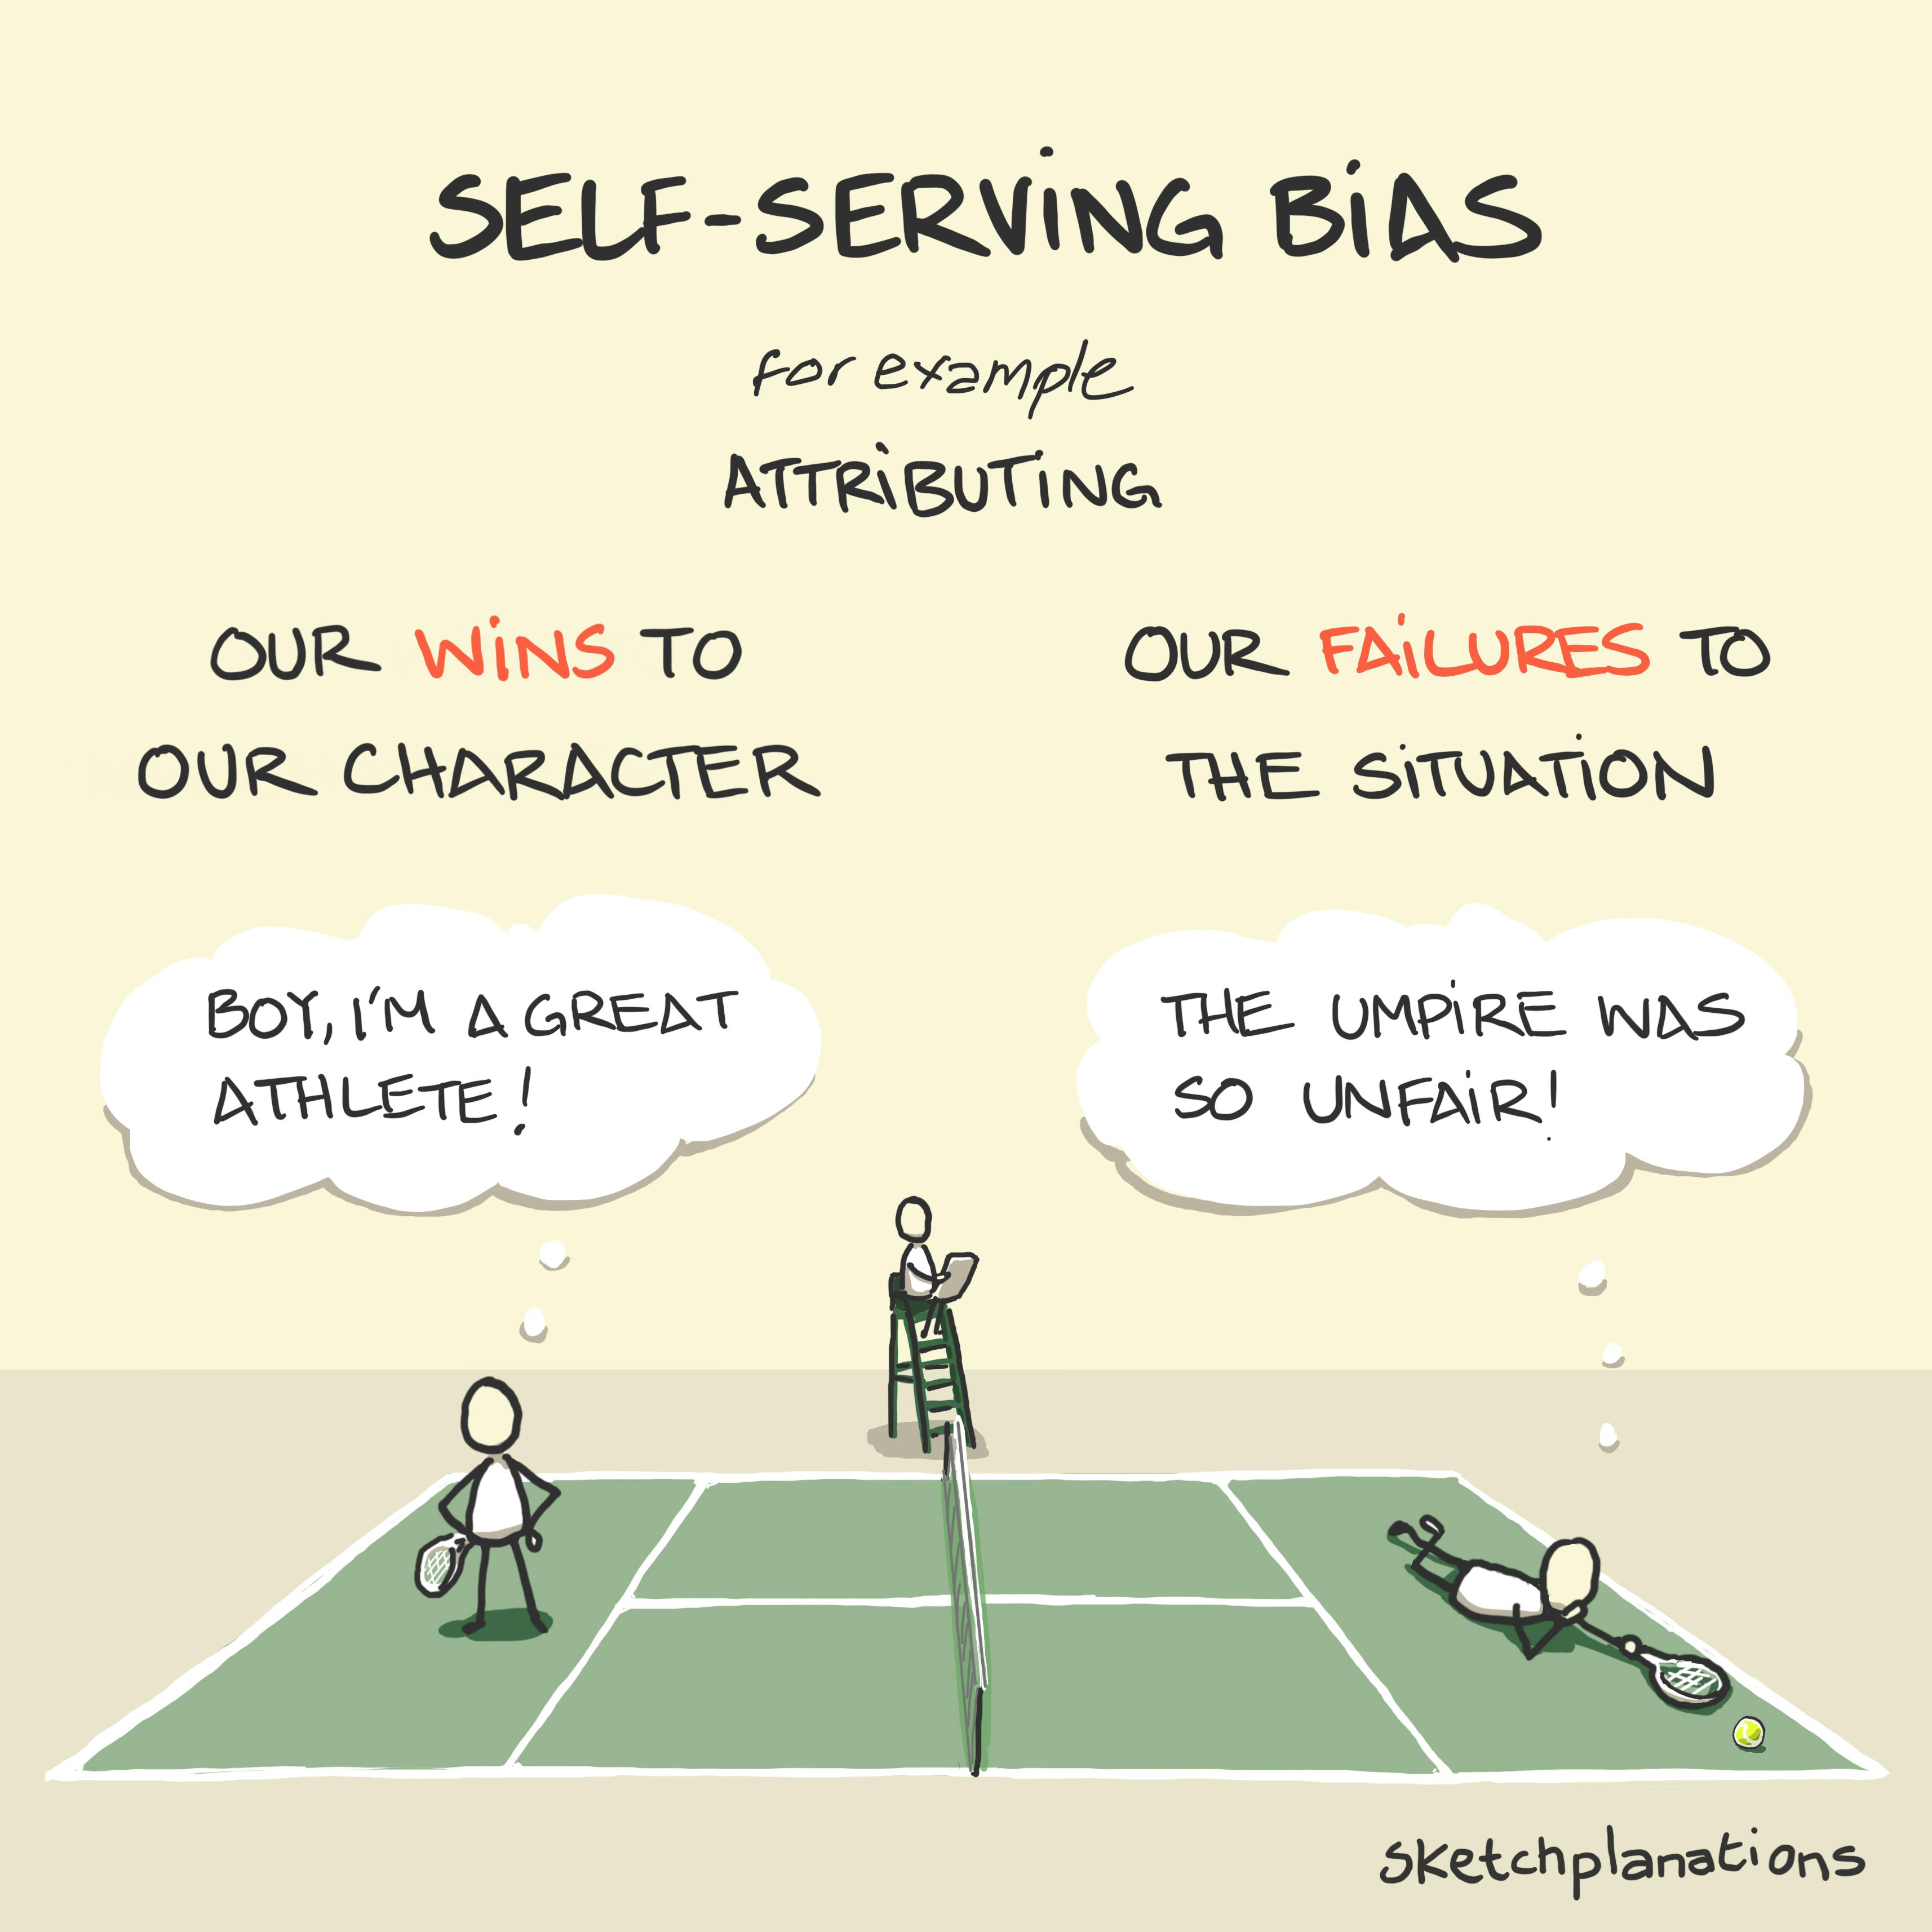 Self-serving bias illustration: two tennis players think on their contrasting fortunes, the winner proud of their athleticism (character), and the loser blaming the umpire (the situation).